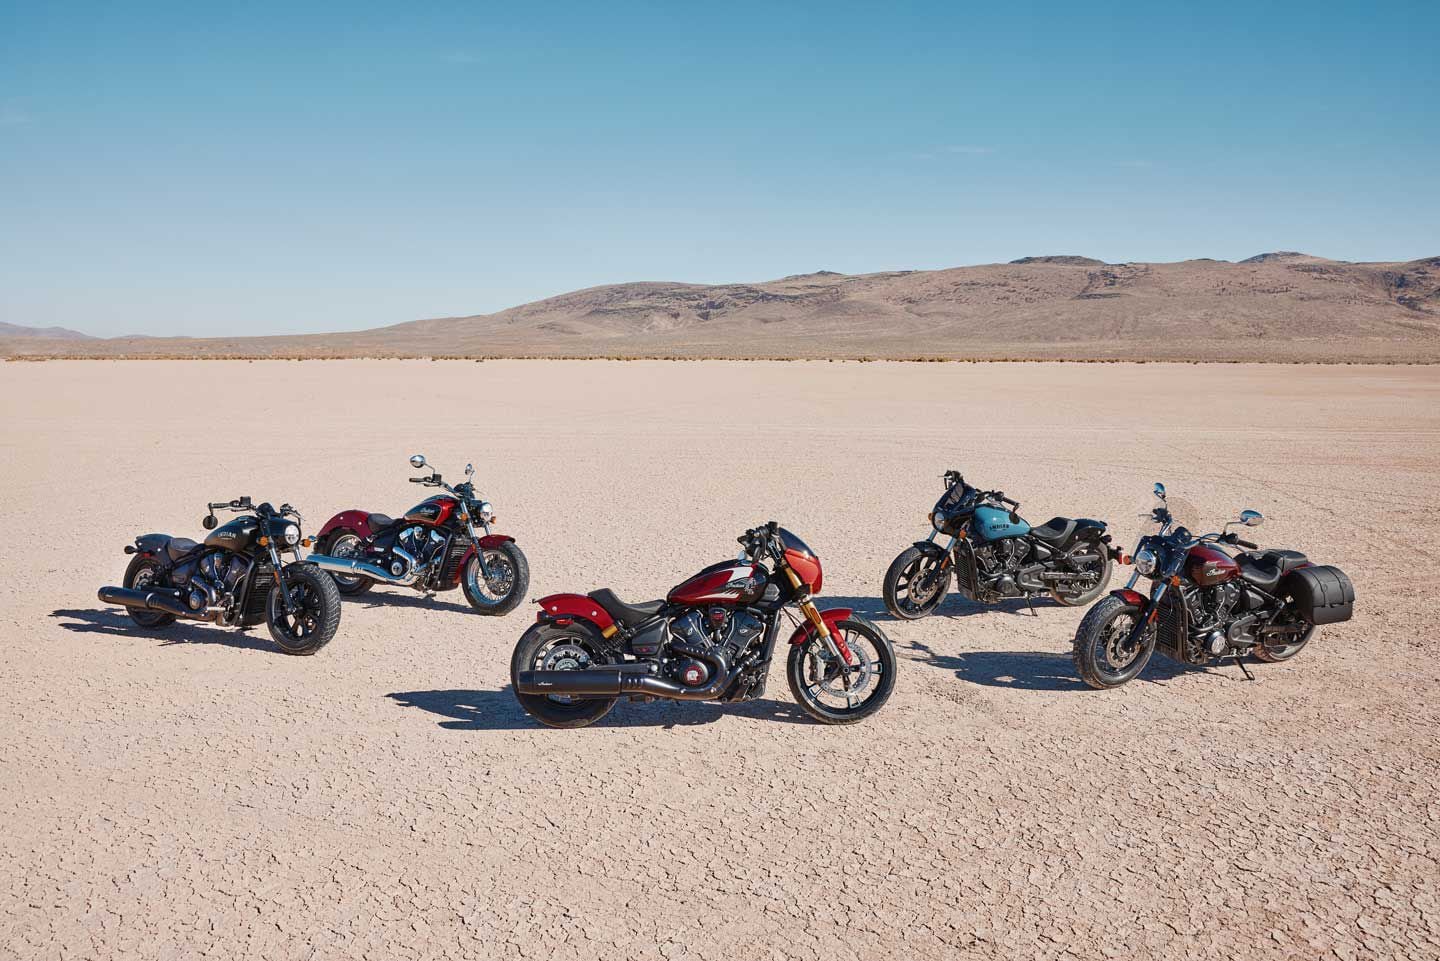 (From left to right) Scout Bobber, Scout Classic, 101 Scout, Sport Scout, and Super Scout.